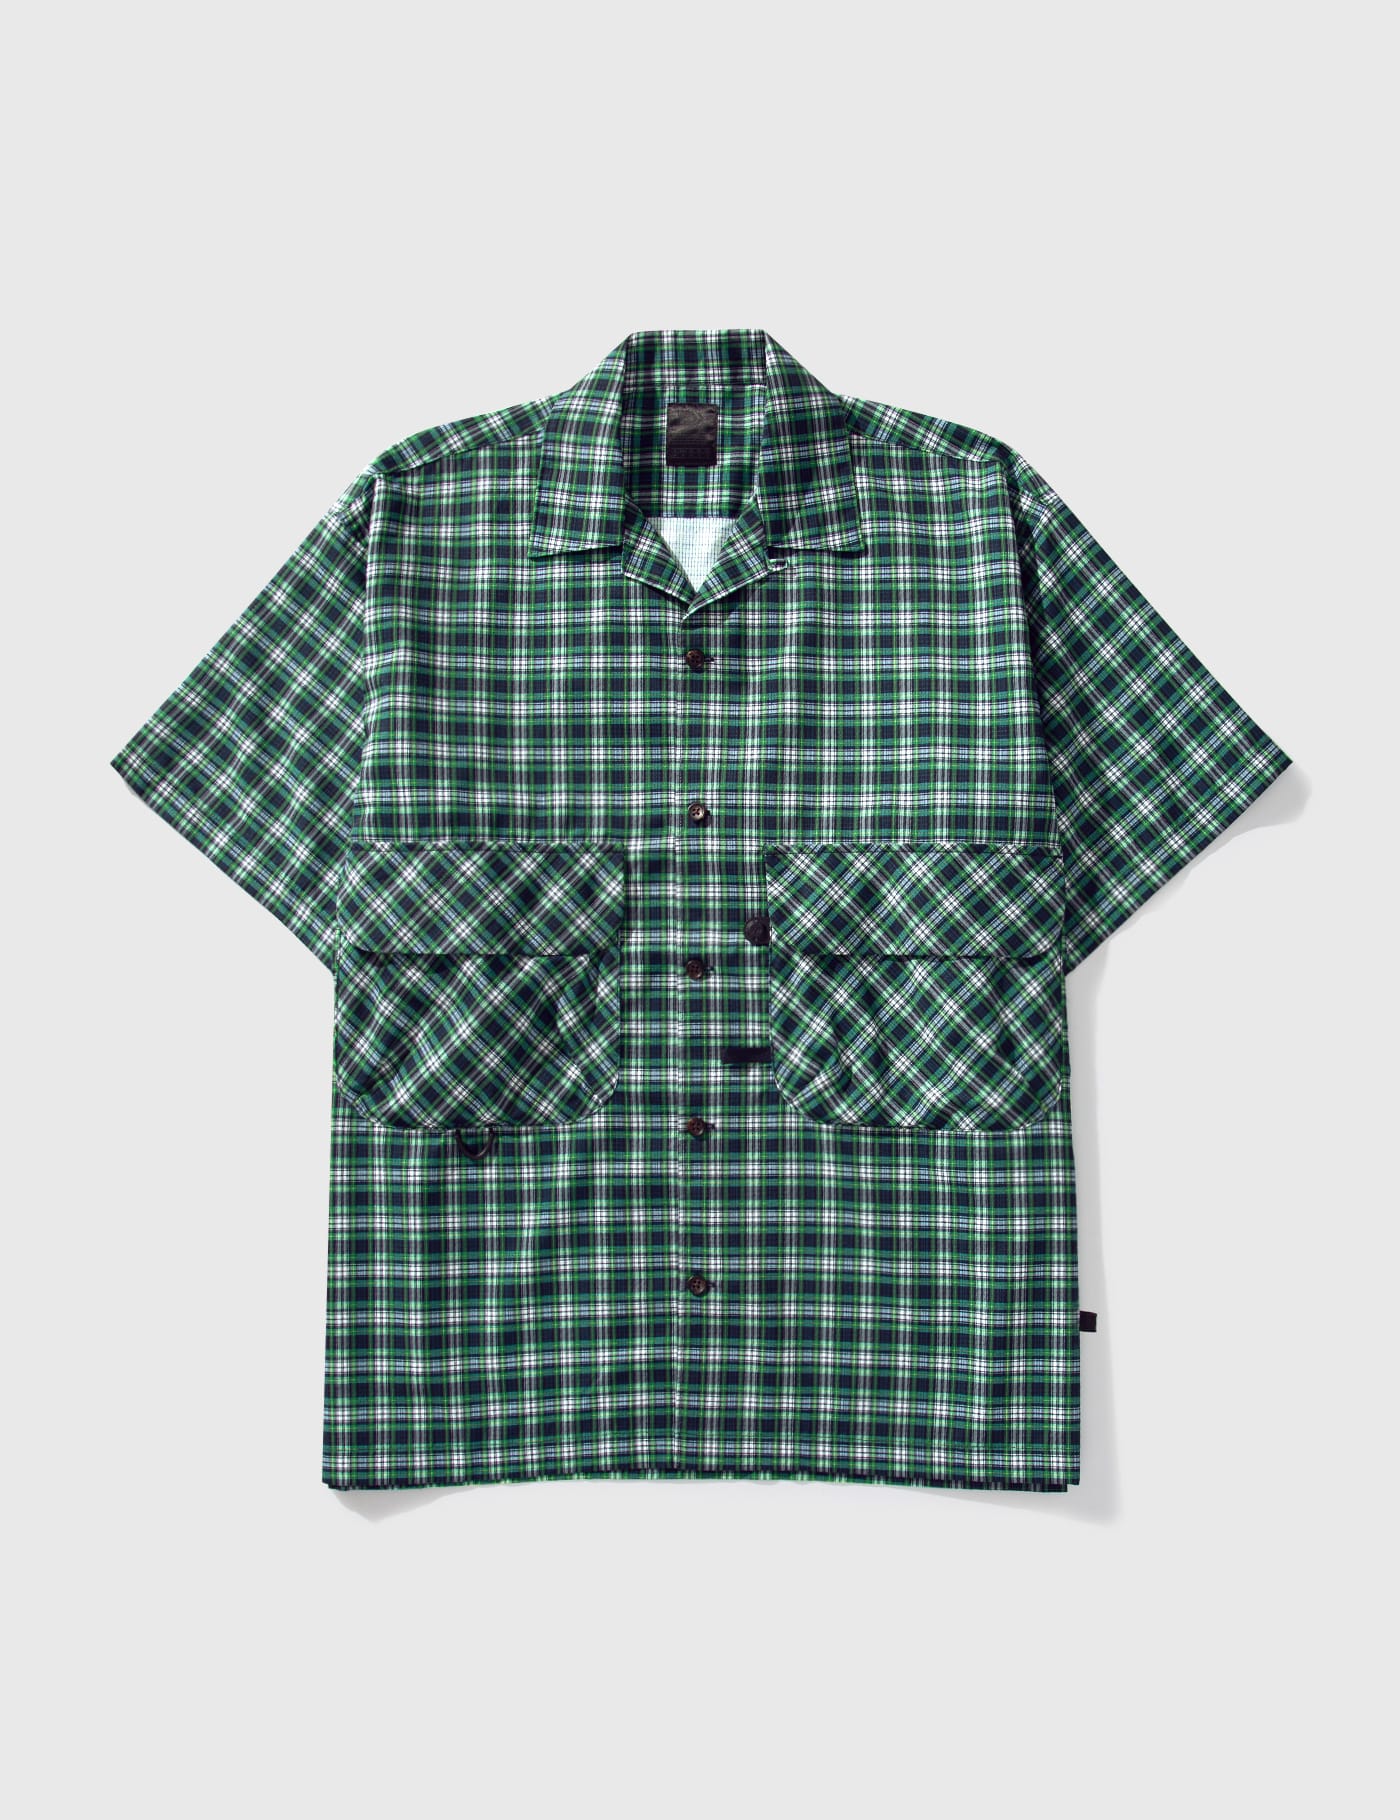 DAIWA PIER39 - Tech Shirt | HBX - Globally Curated Fashion and Lifestyle by  Hypebeast